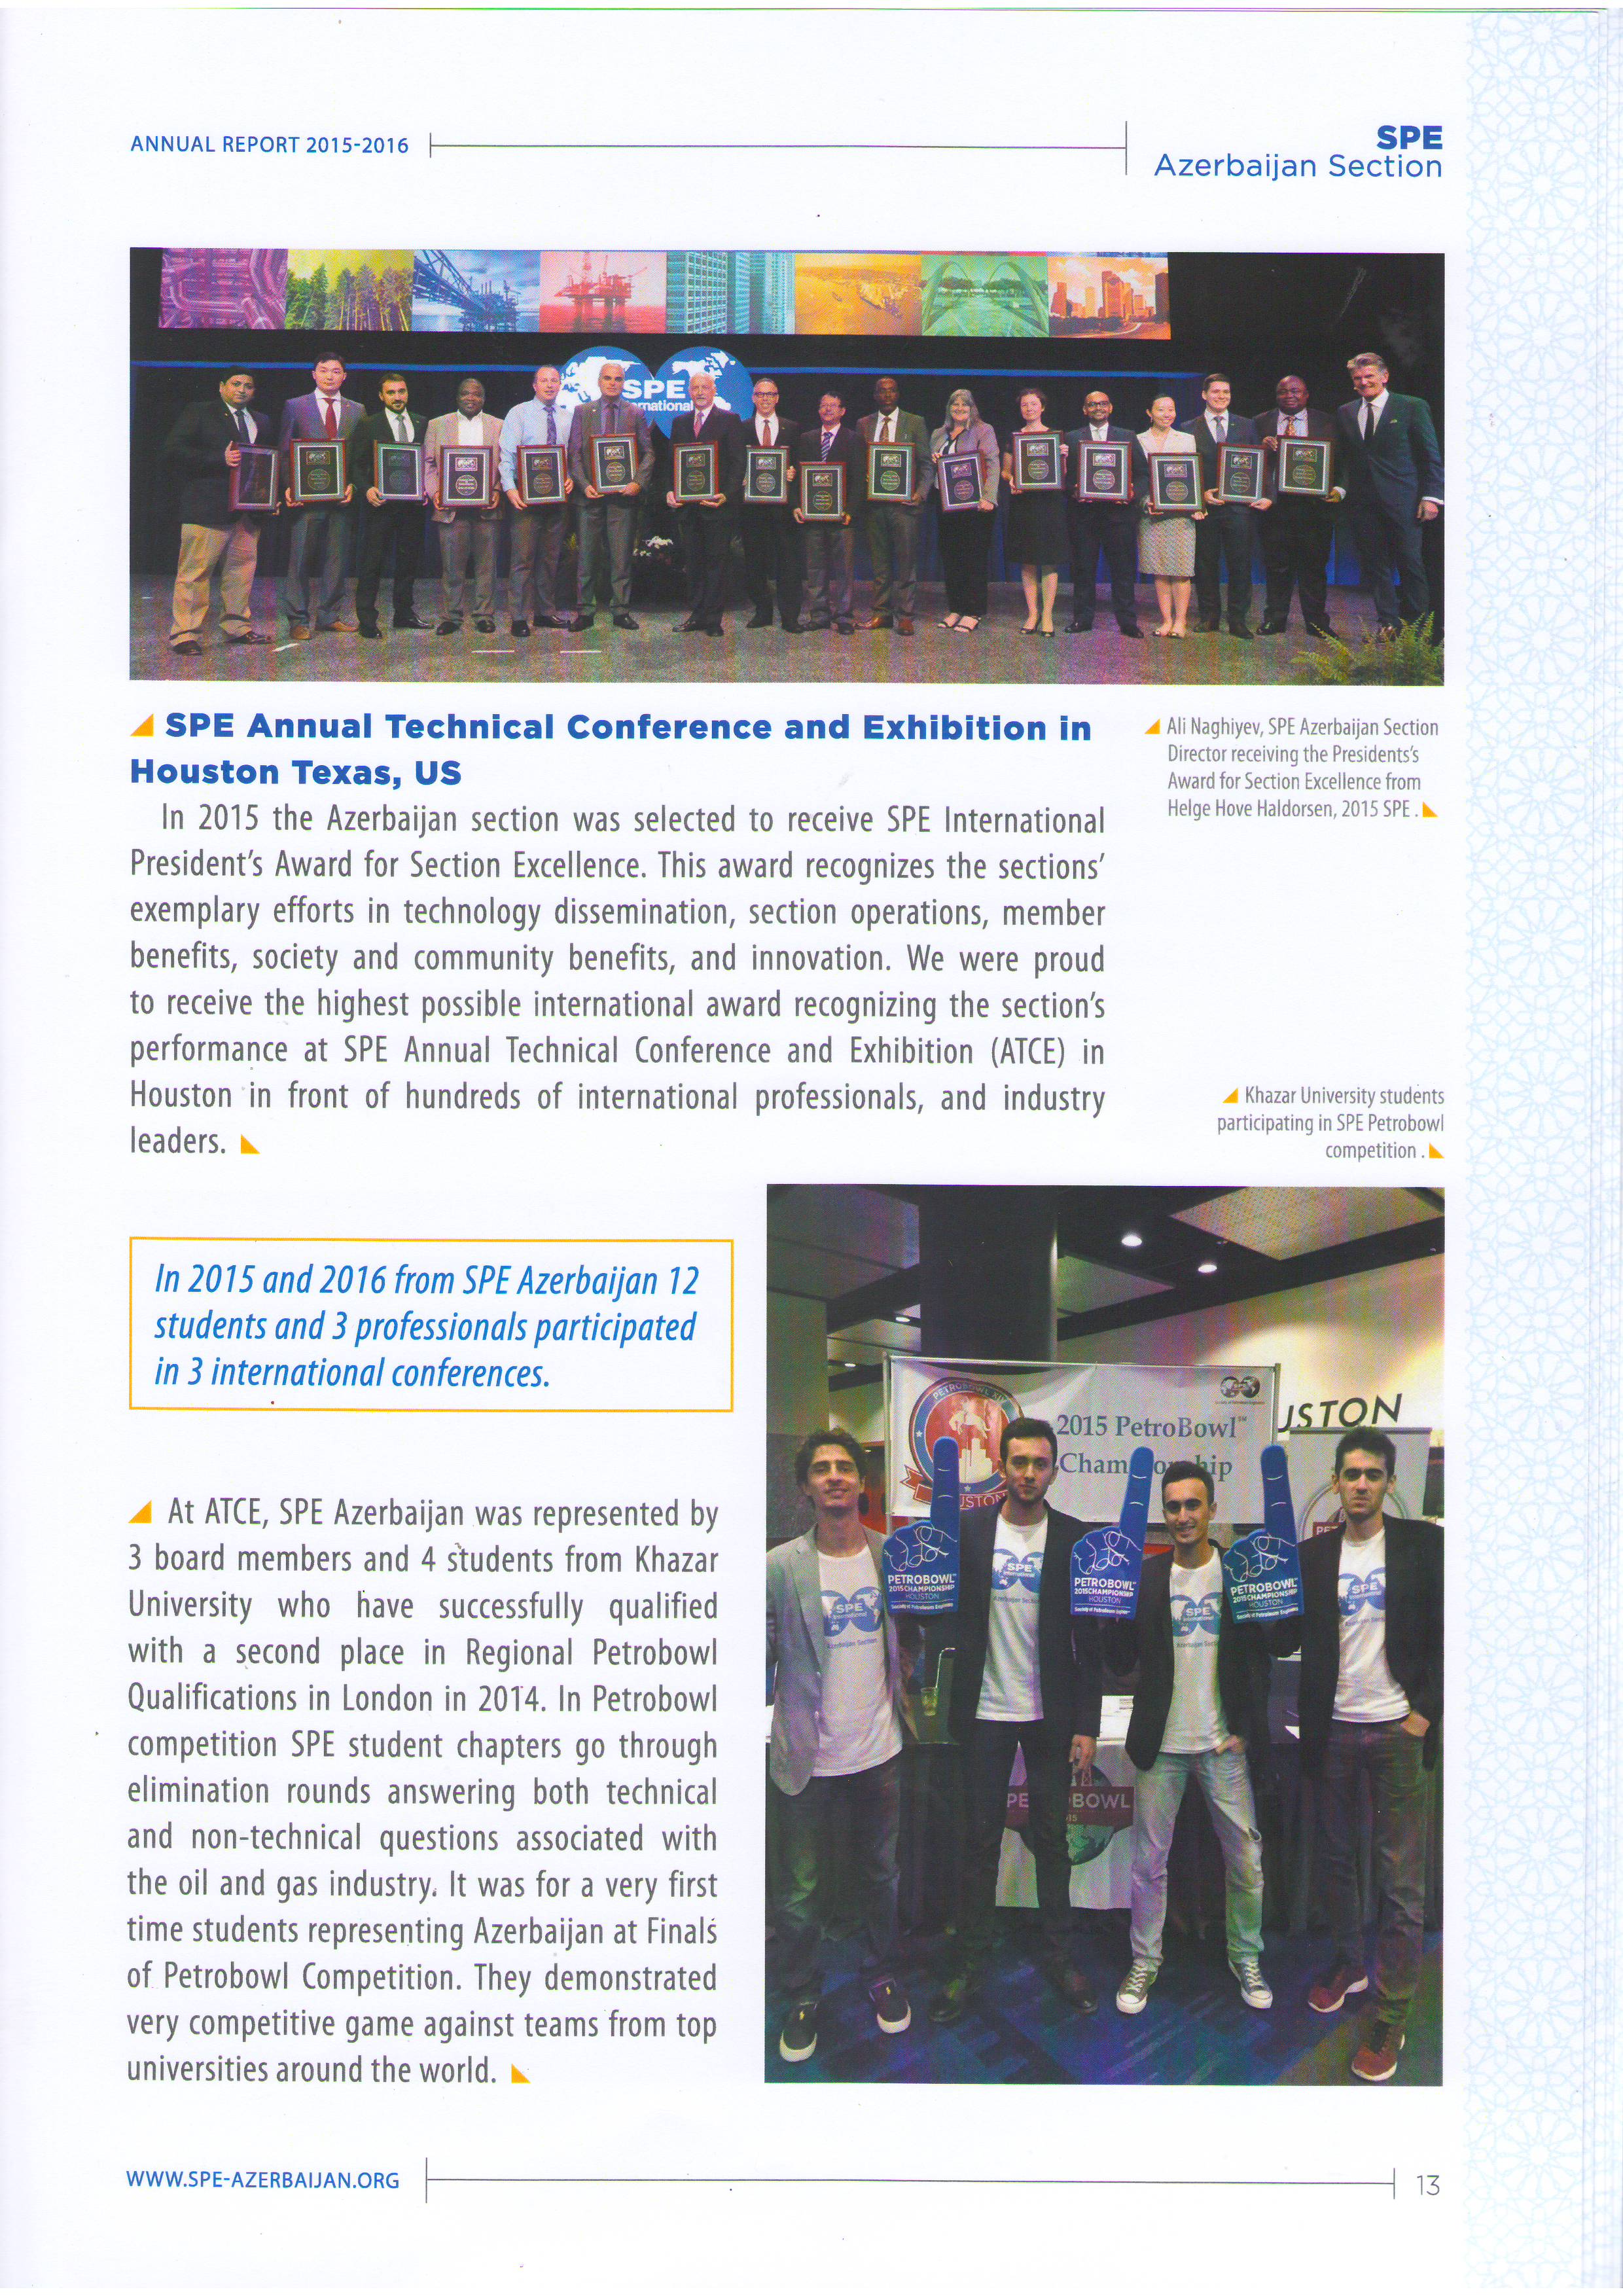 Article about Students’ PetroBowl Success in SPE Annual Report